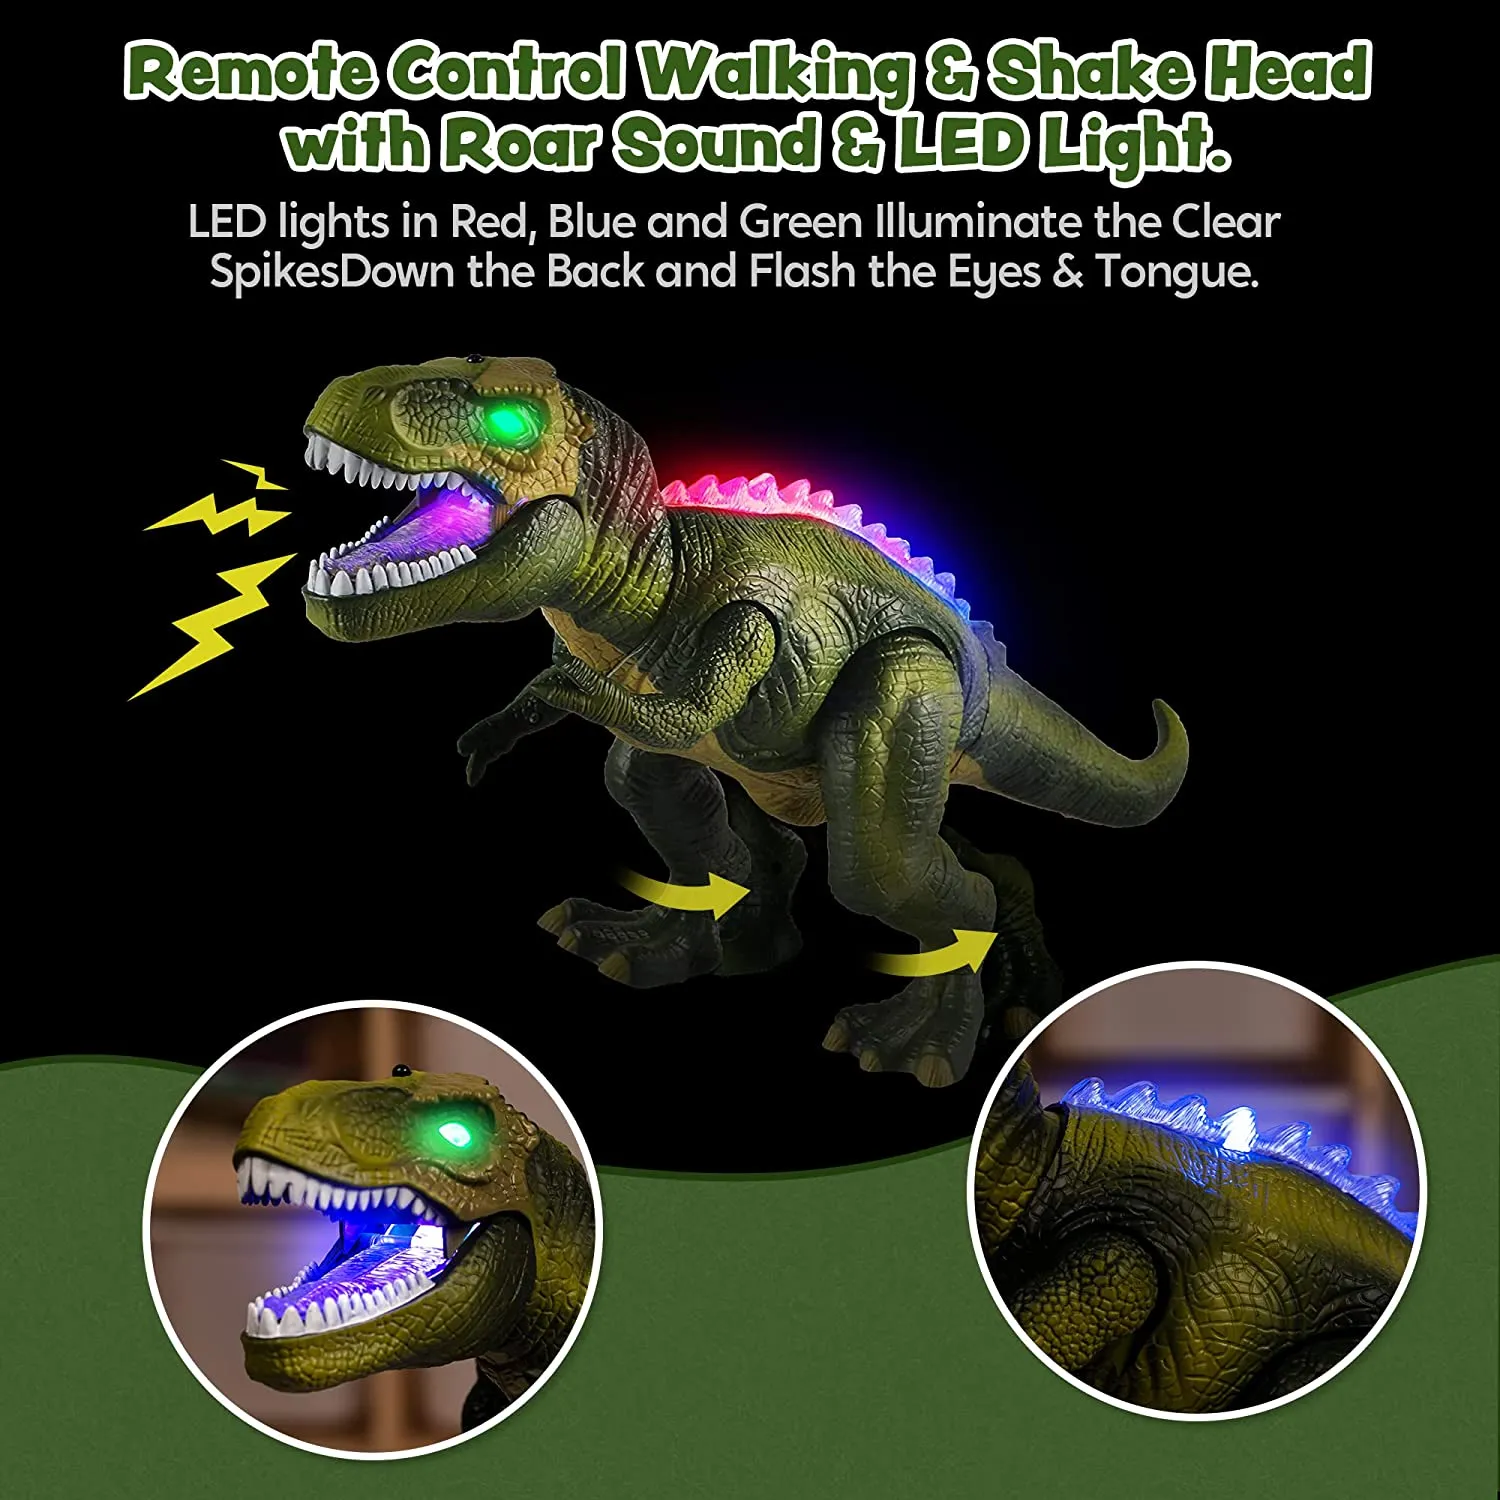 Fun Remote Control Walking Dinosaur with Lights and Sounds